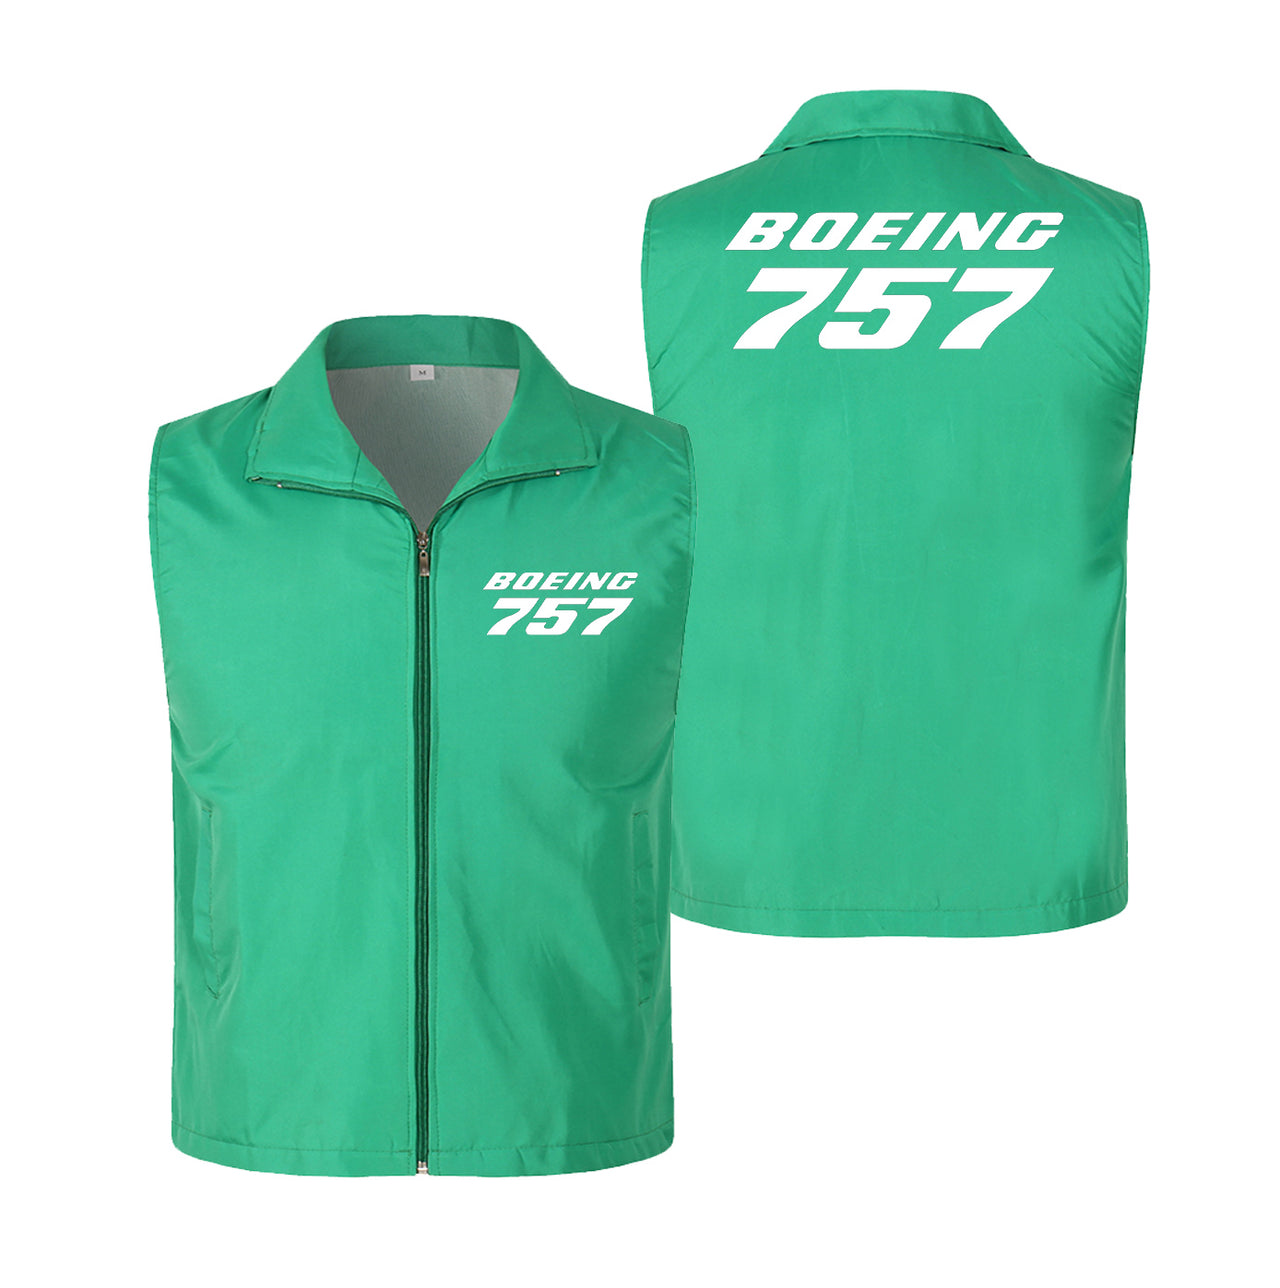 Boeing 757 & Text Designed Thin Style Vests